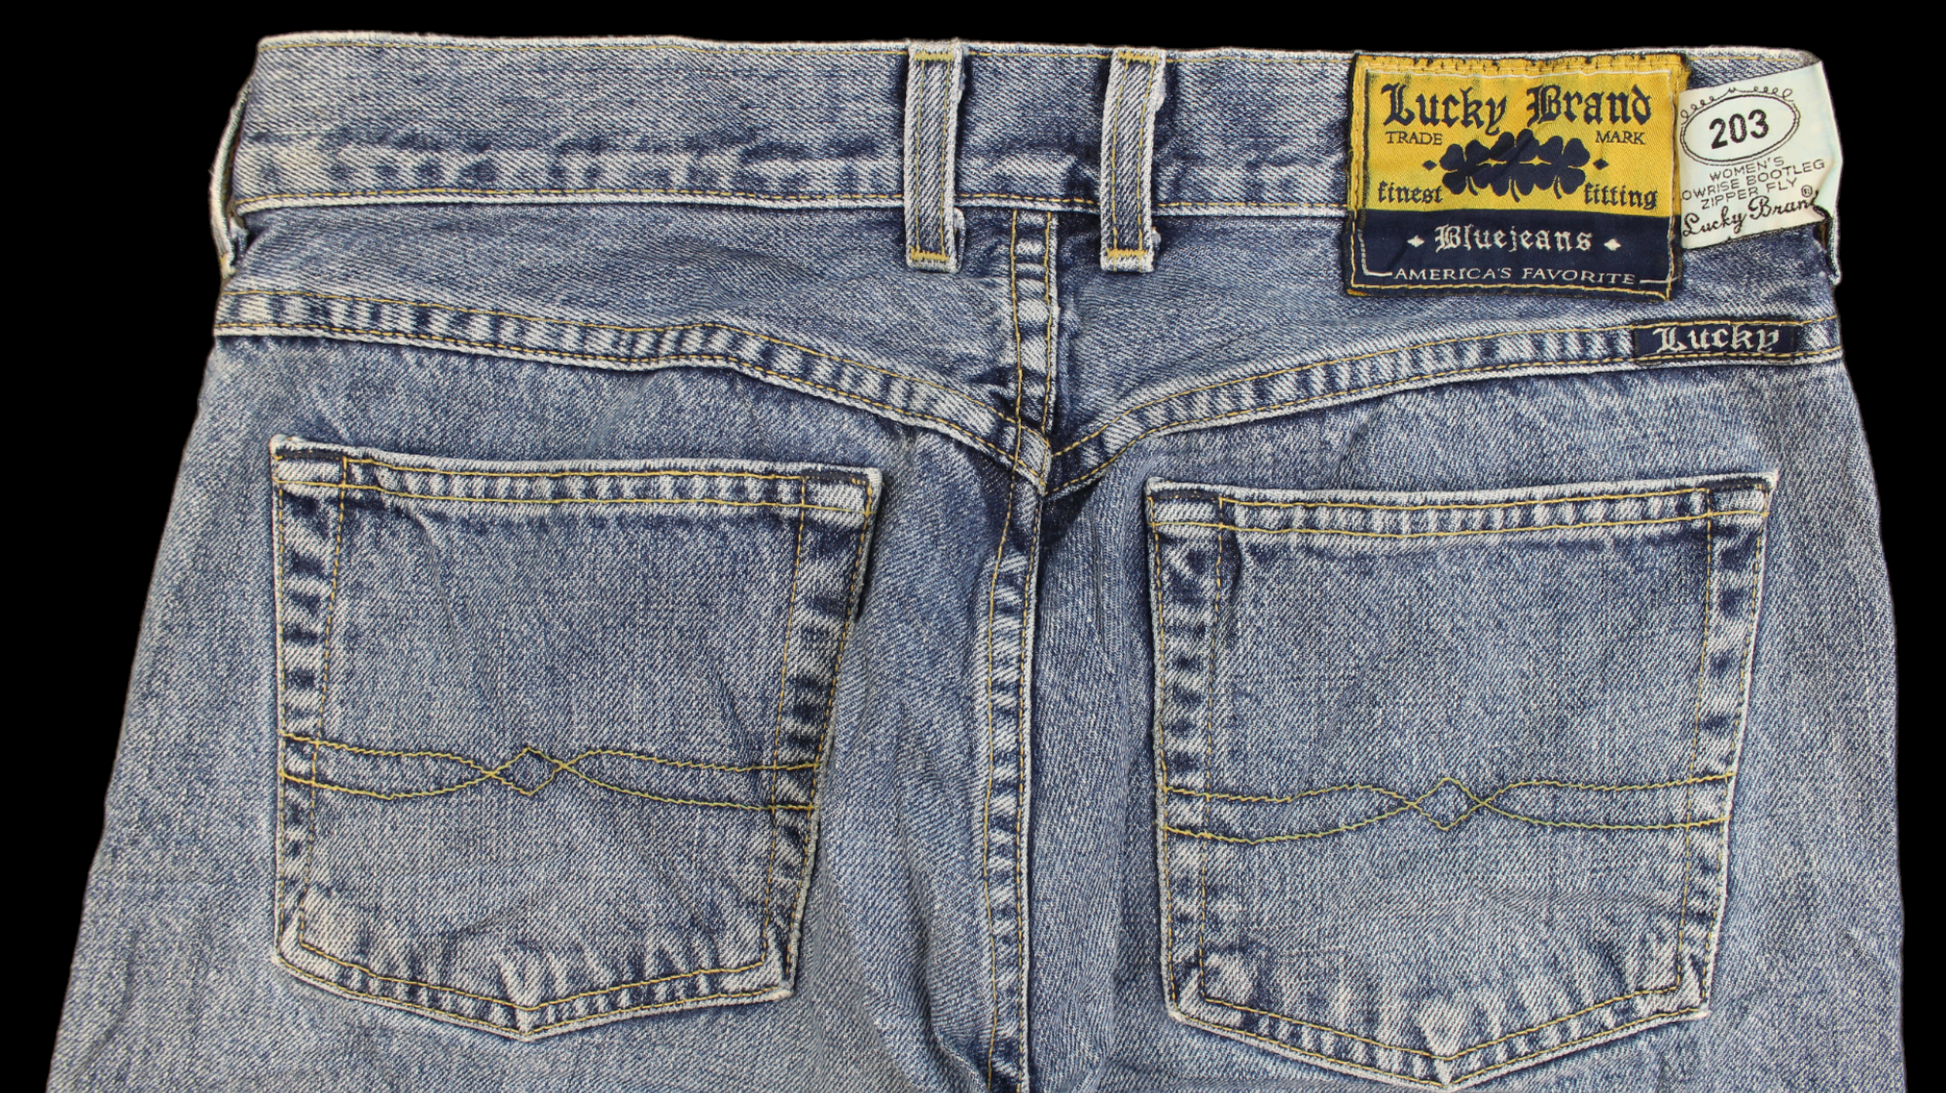 Lucky Brand Dungarees jeans – Thriller